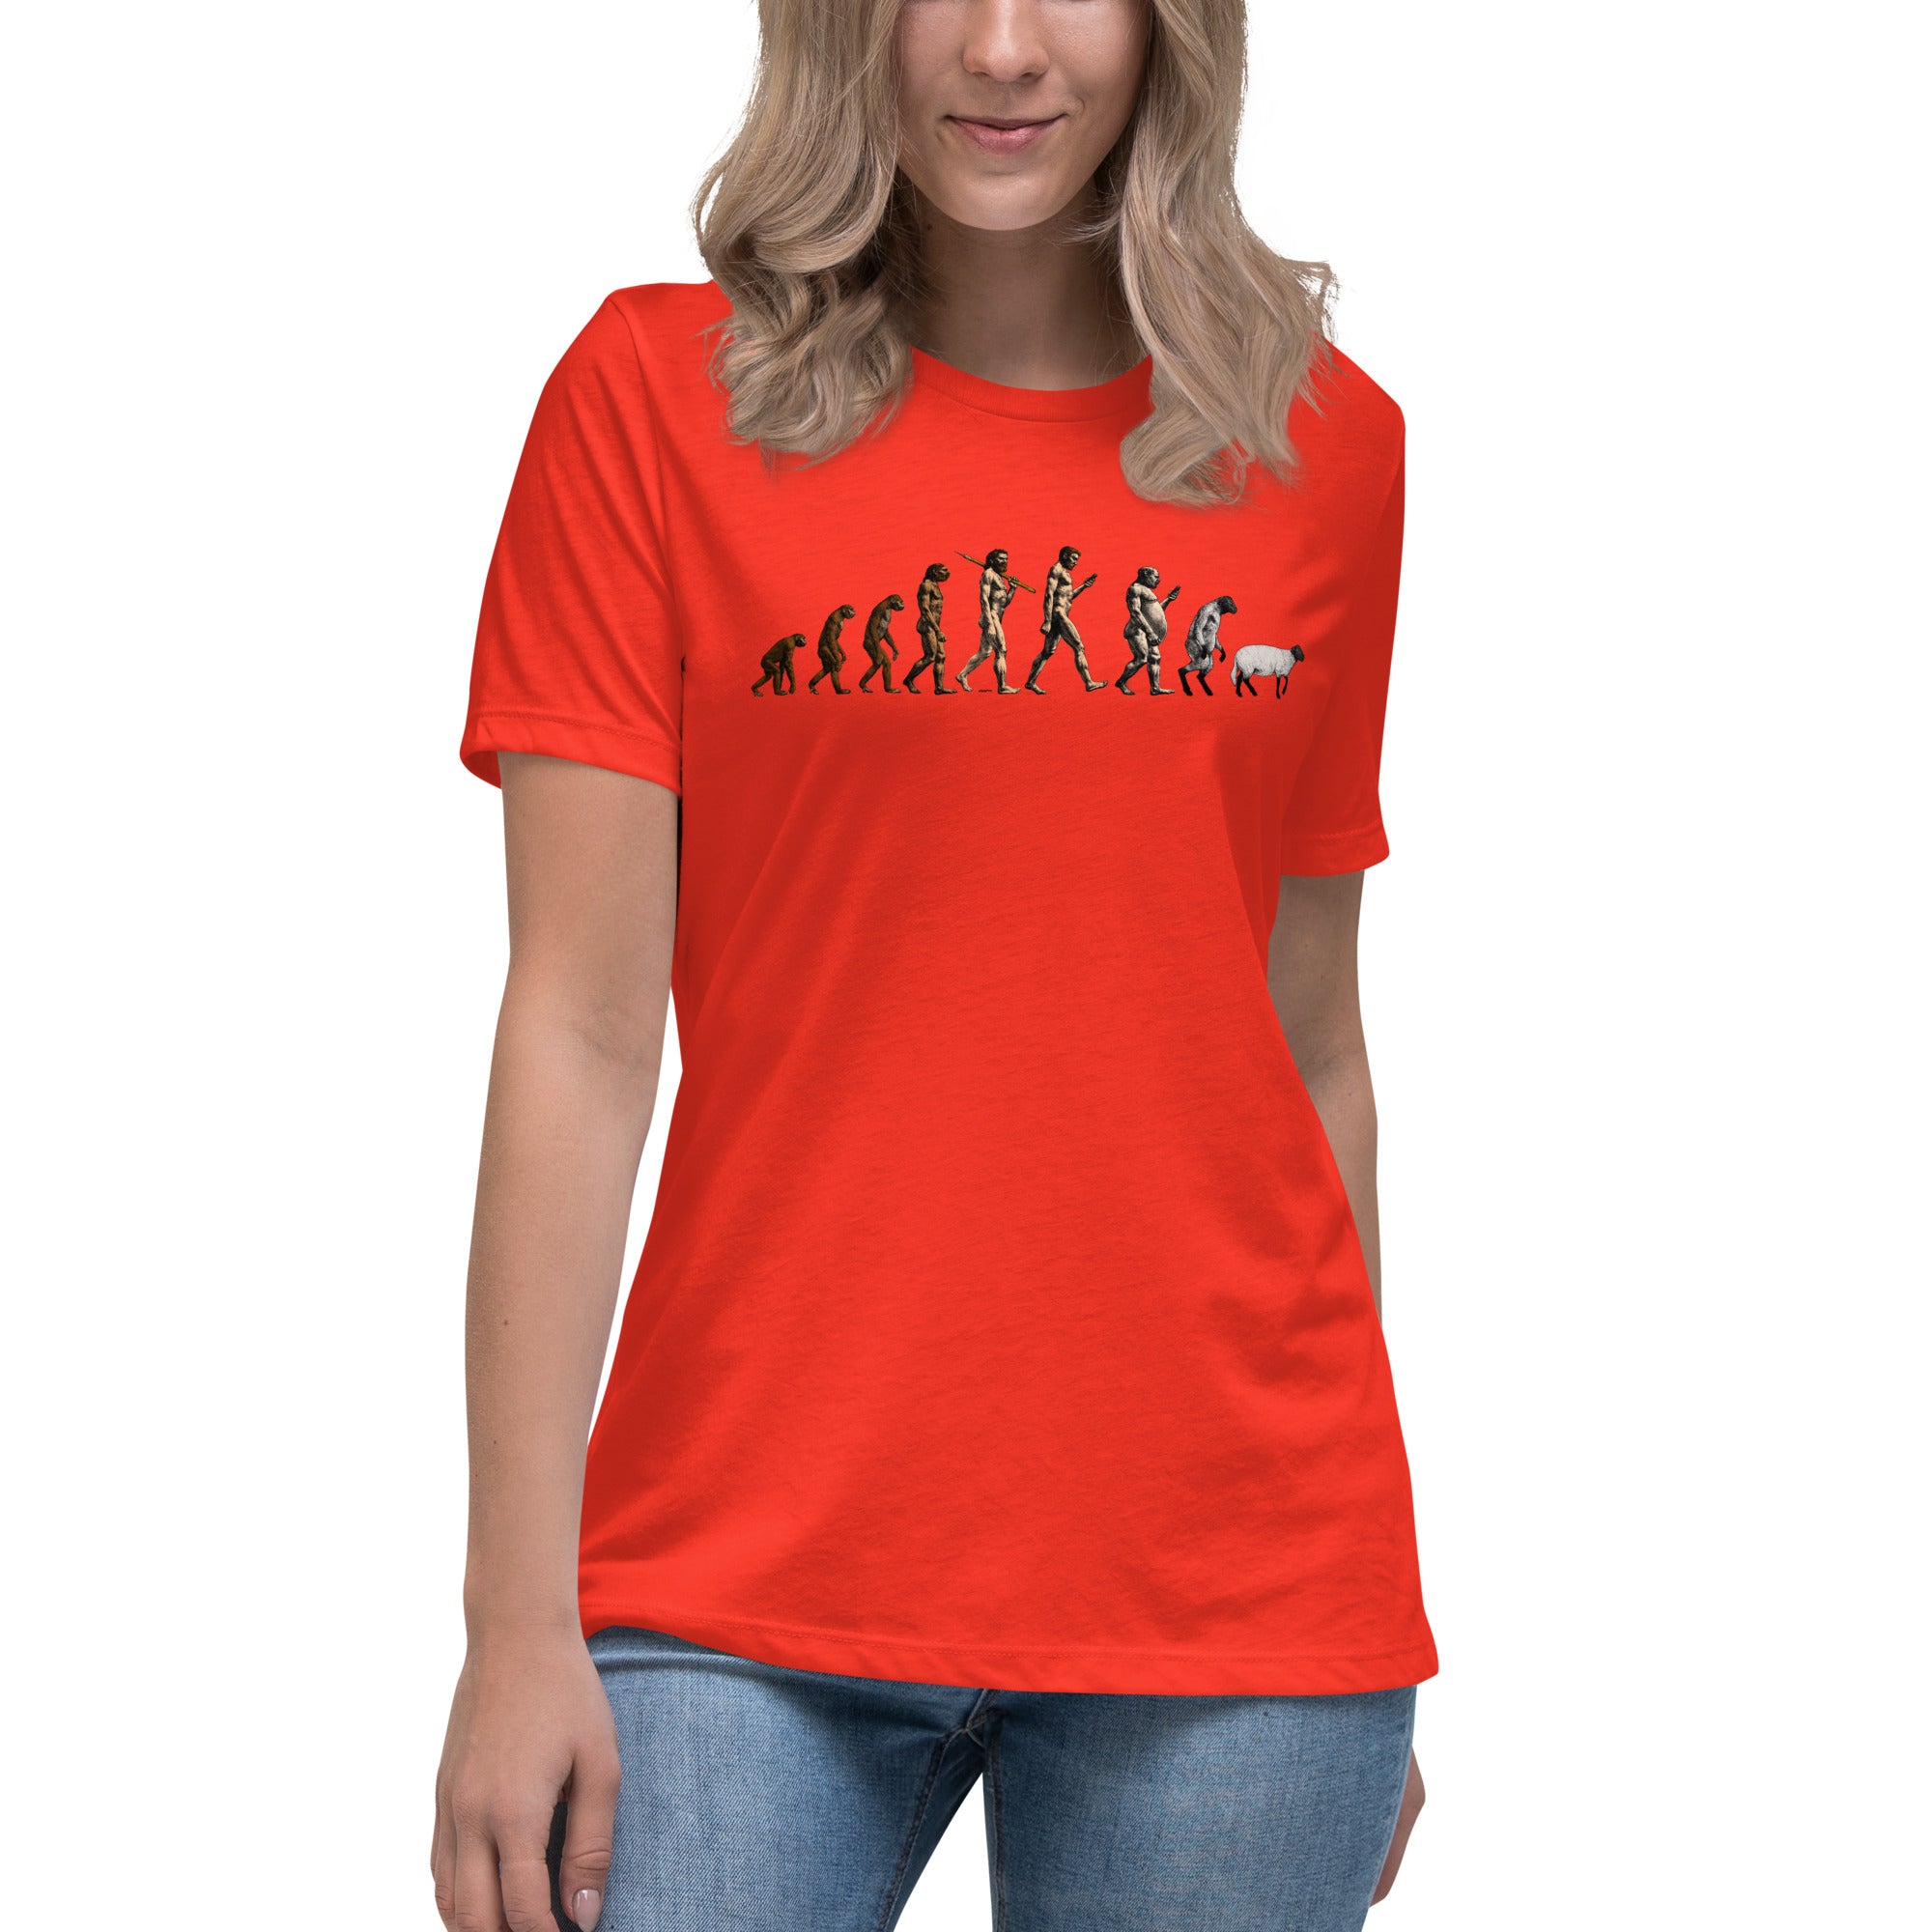 March of Devolution Sheeple Women's Relaxed T-Shirt